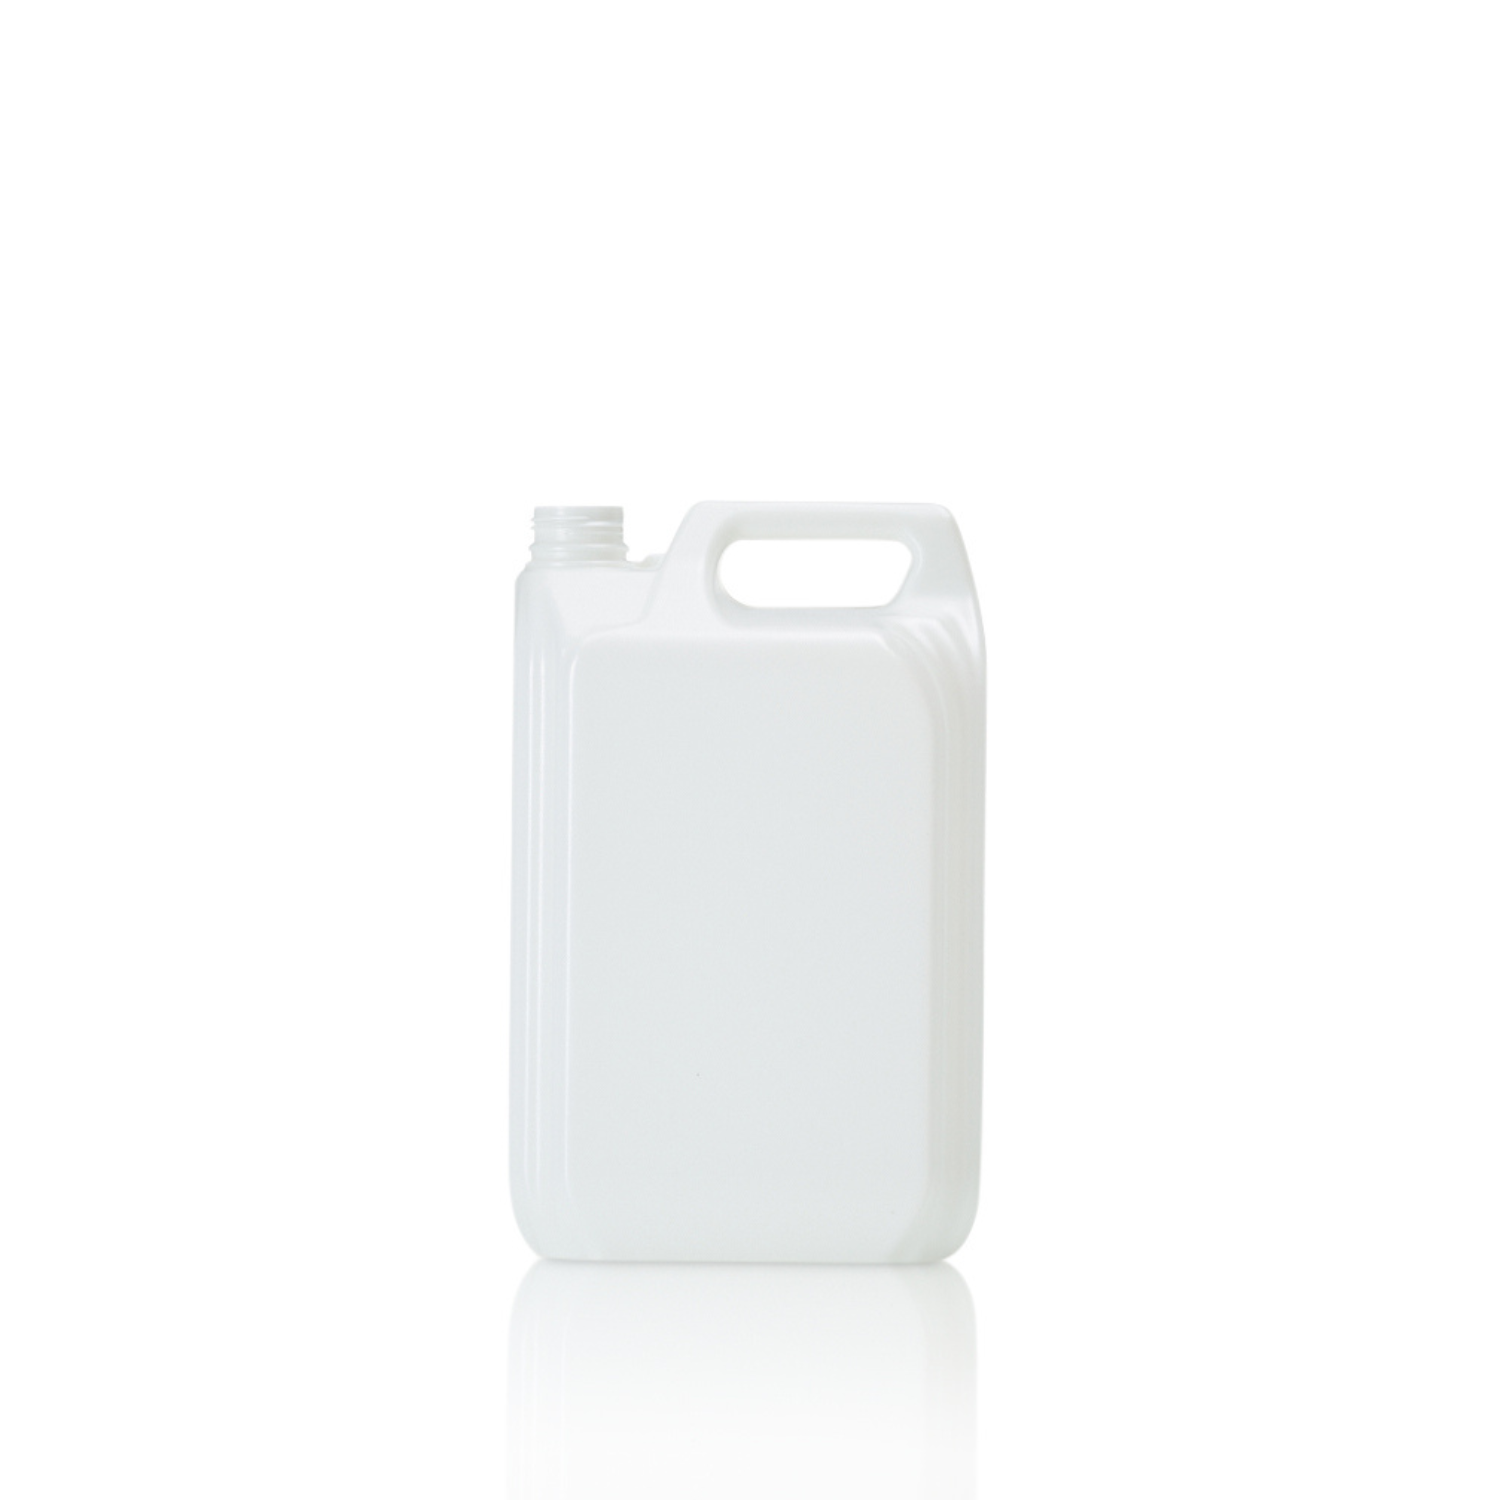 5ltr Lightweight Natural HDPE 30% PCR Jerry Can for Slit Band T/E Caps